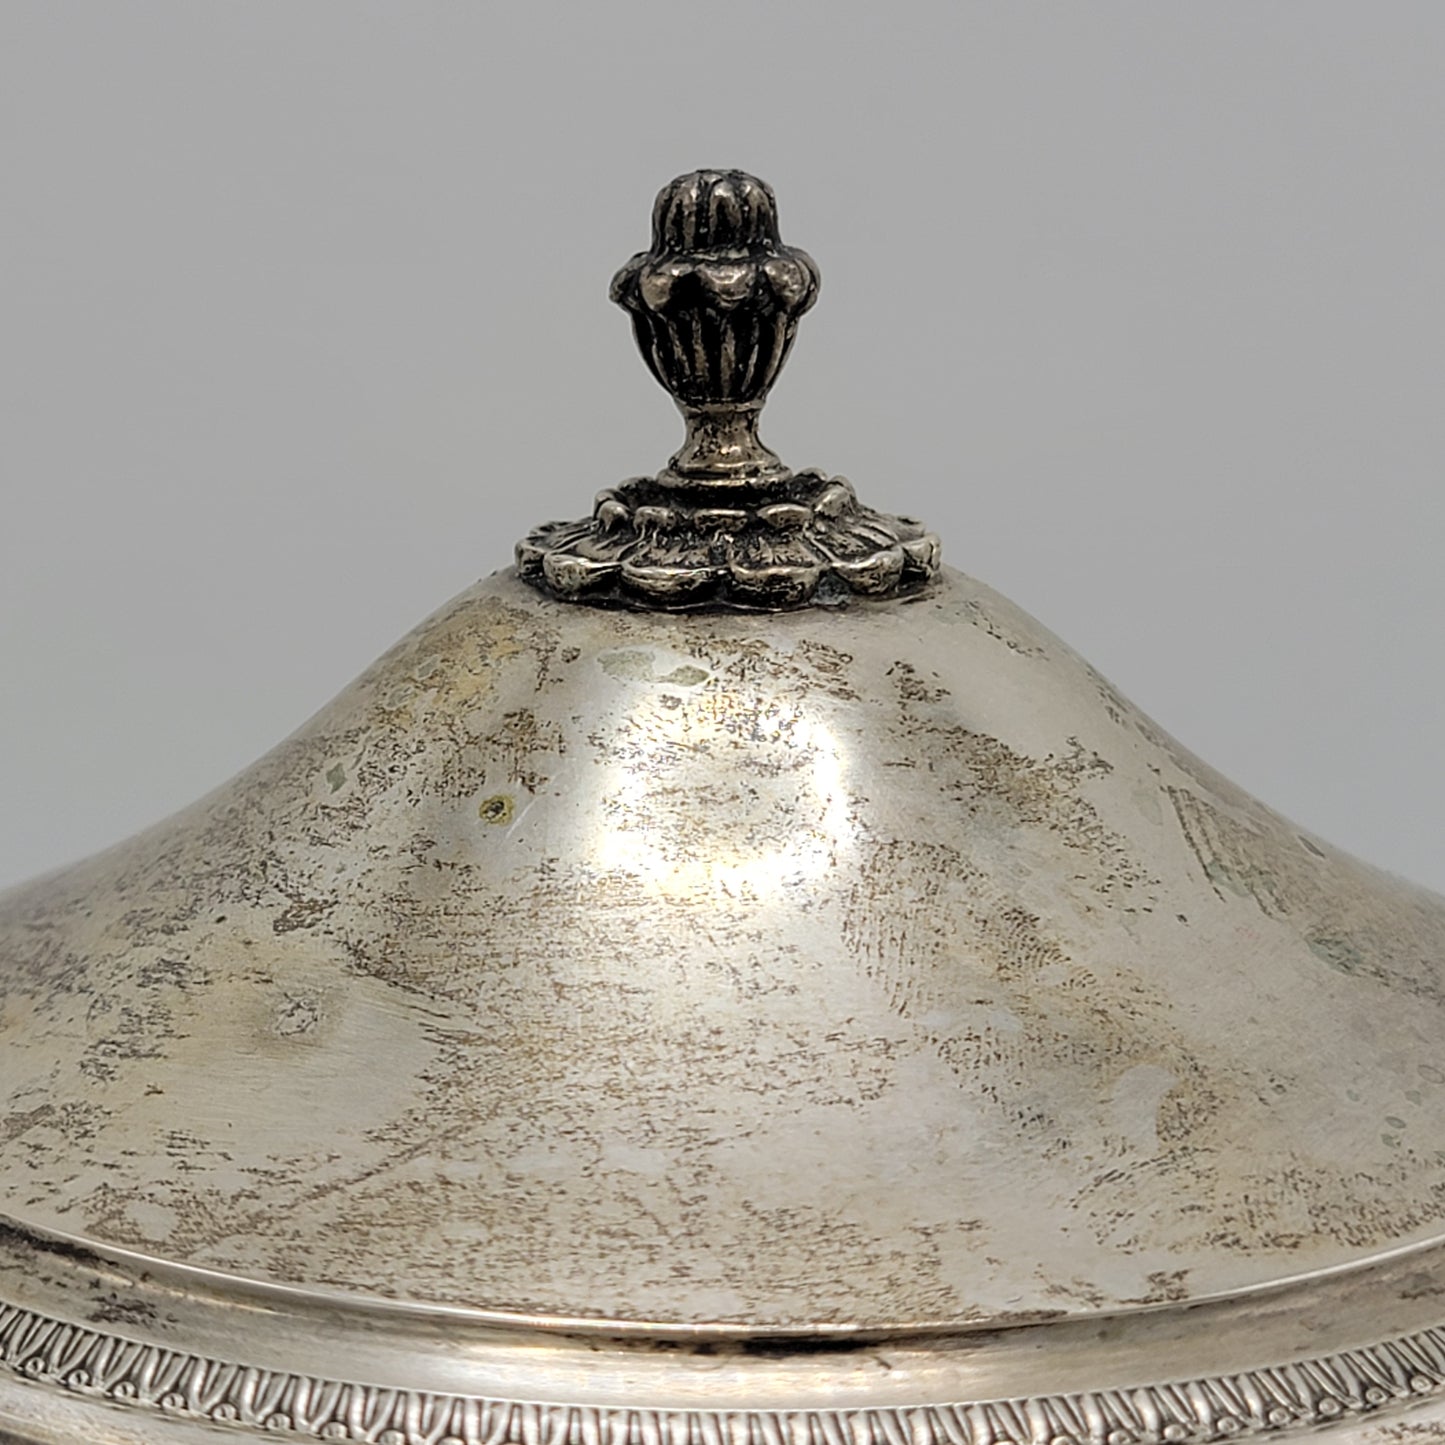 Italian silver Neoclassical Style Covered Candy Dish